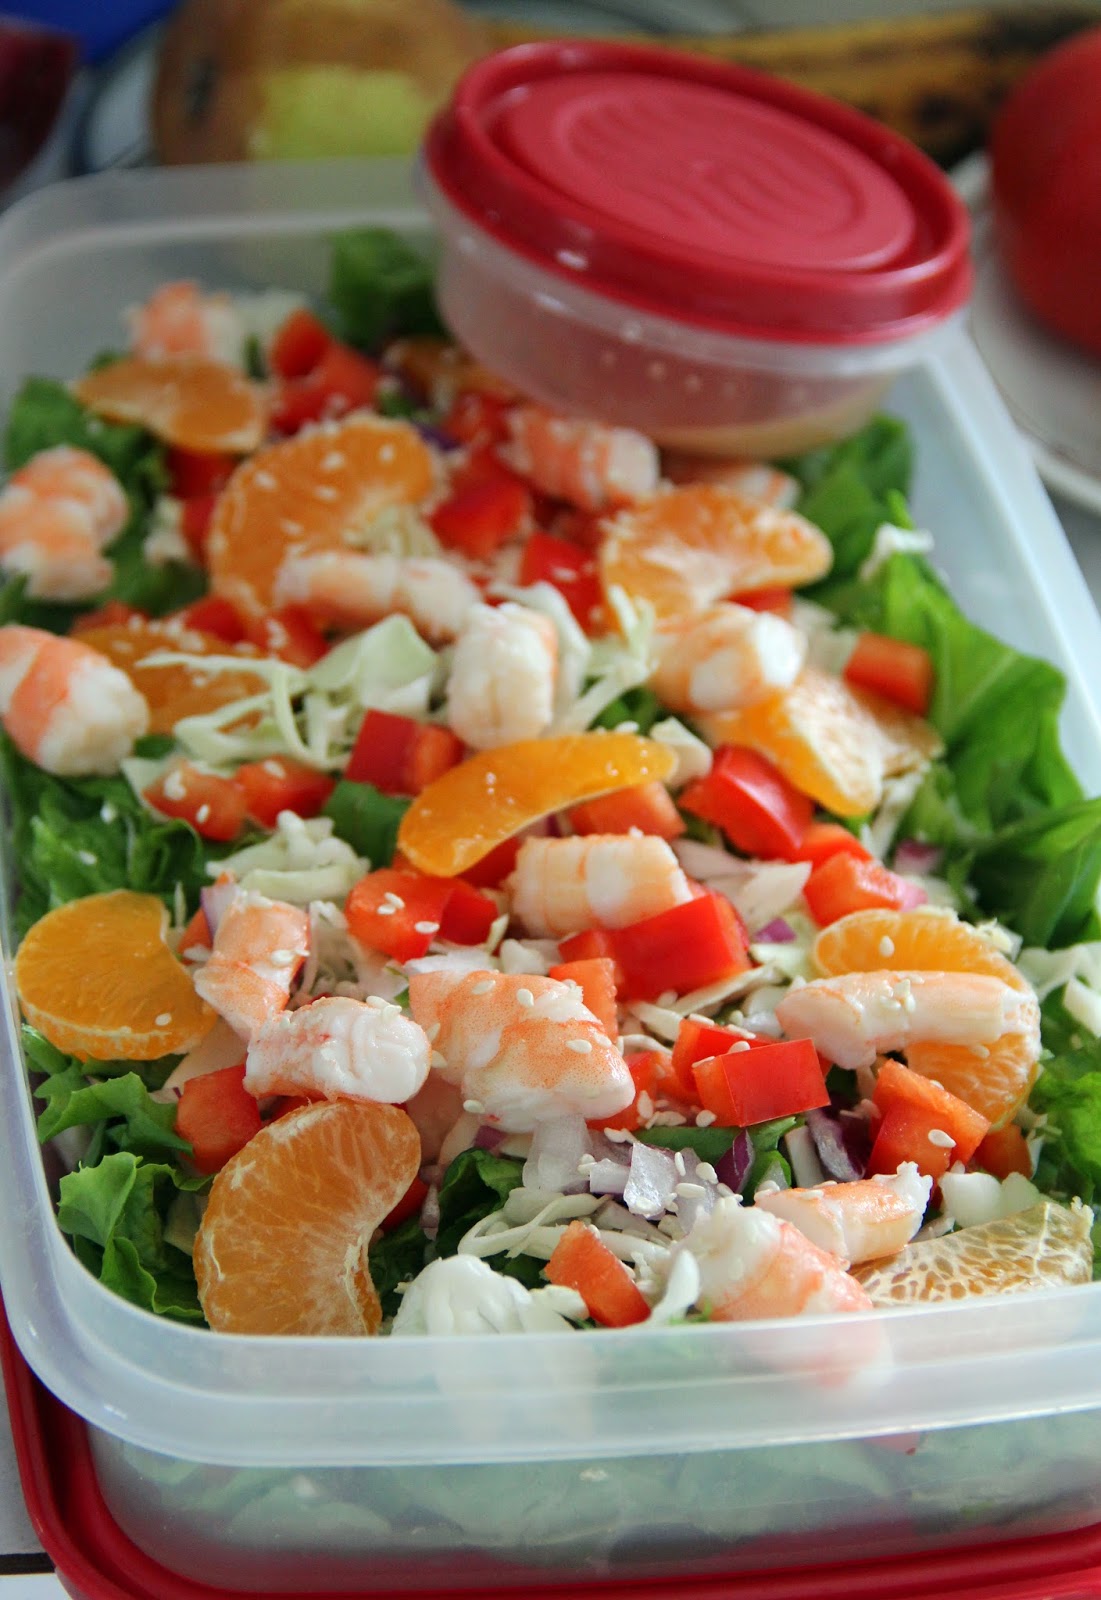 Jo and Sue: Asian Inspired Prawn Salad With Sesame Dressing